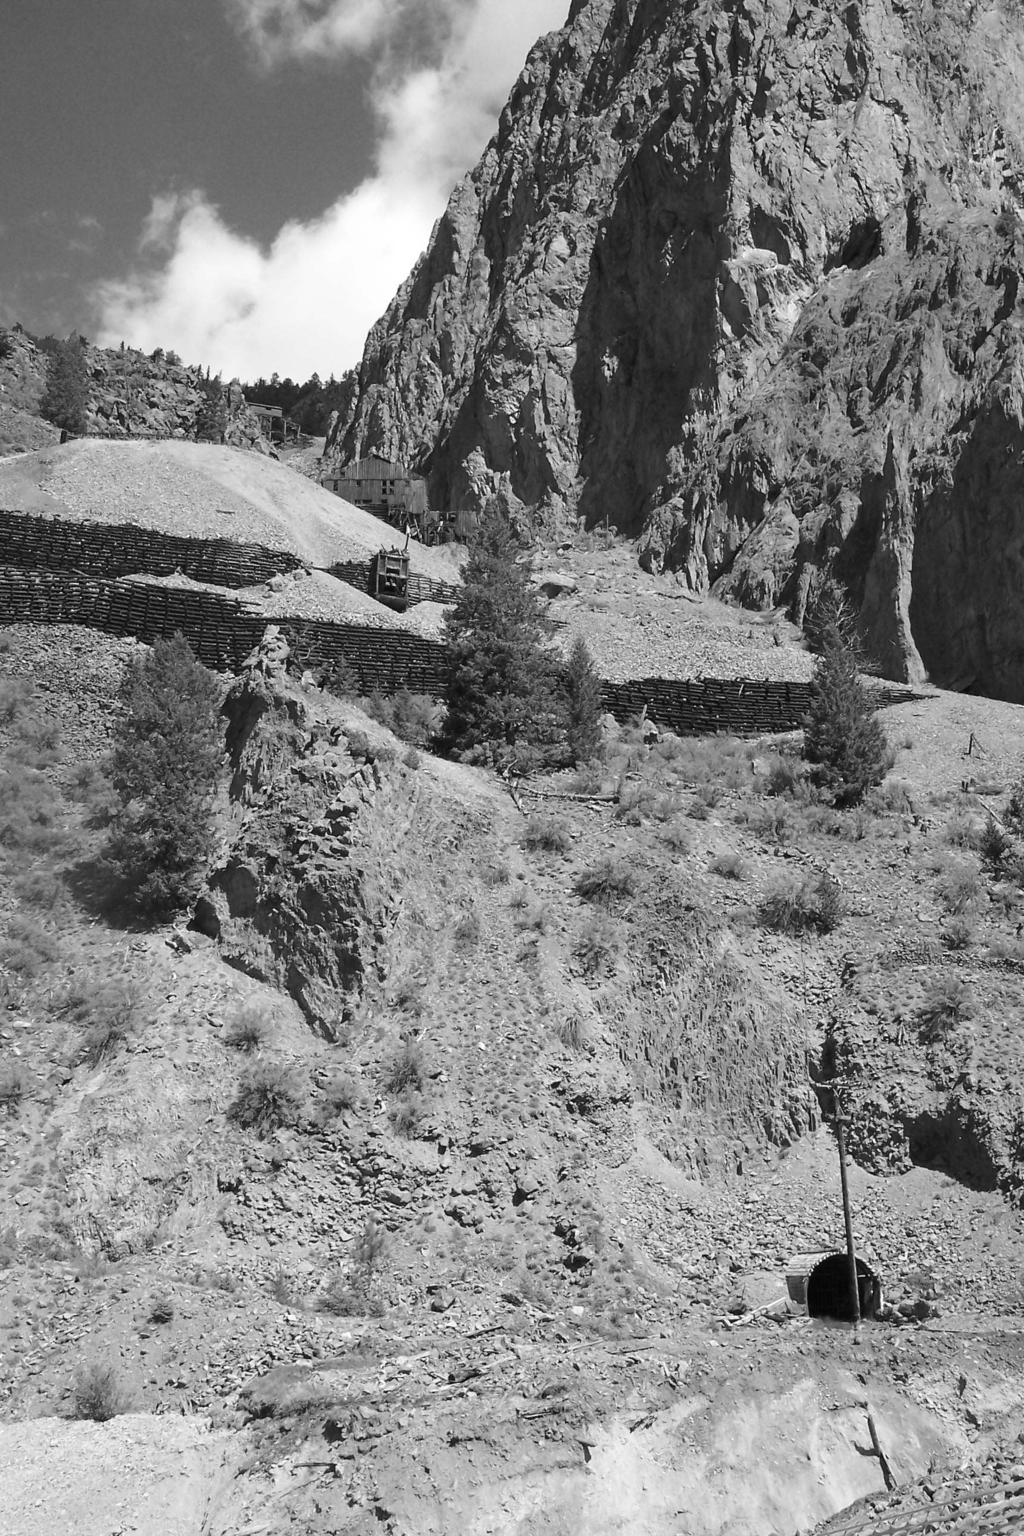 Mining History News July 2009 3 Historical and Remediation Information for Creede-area Mines L.